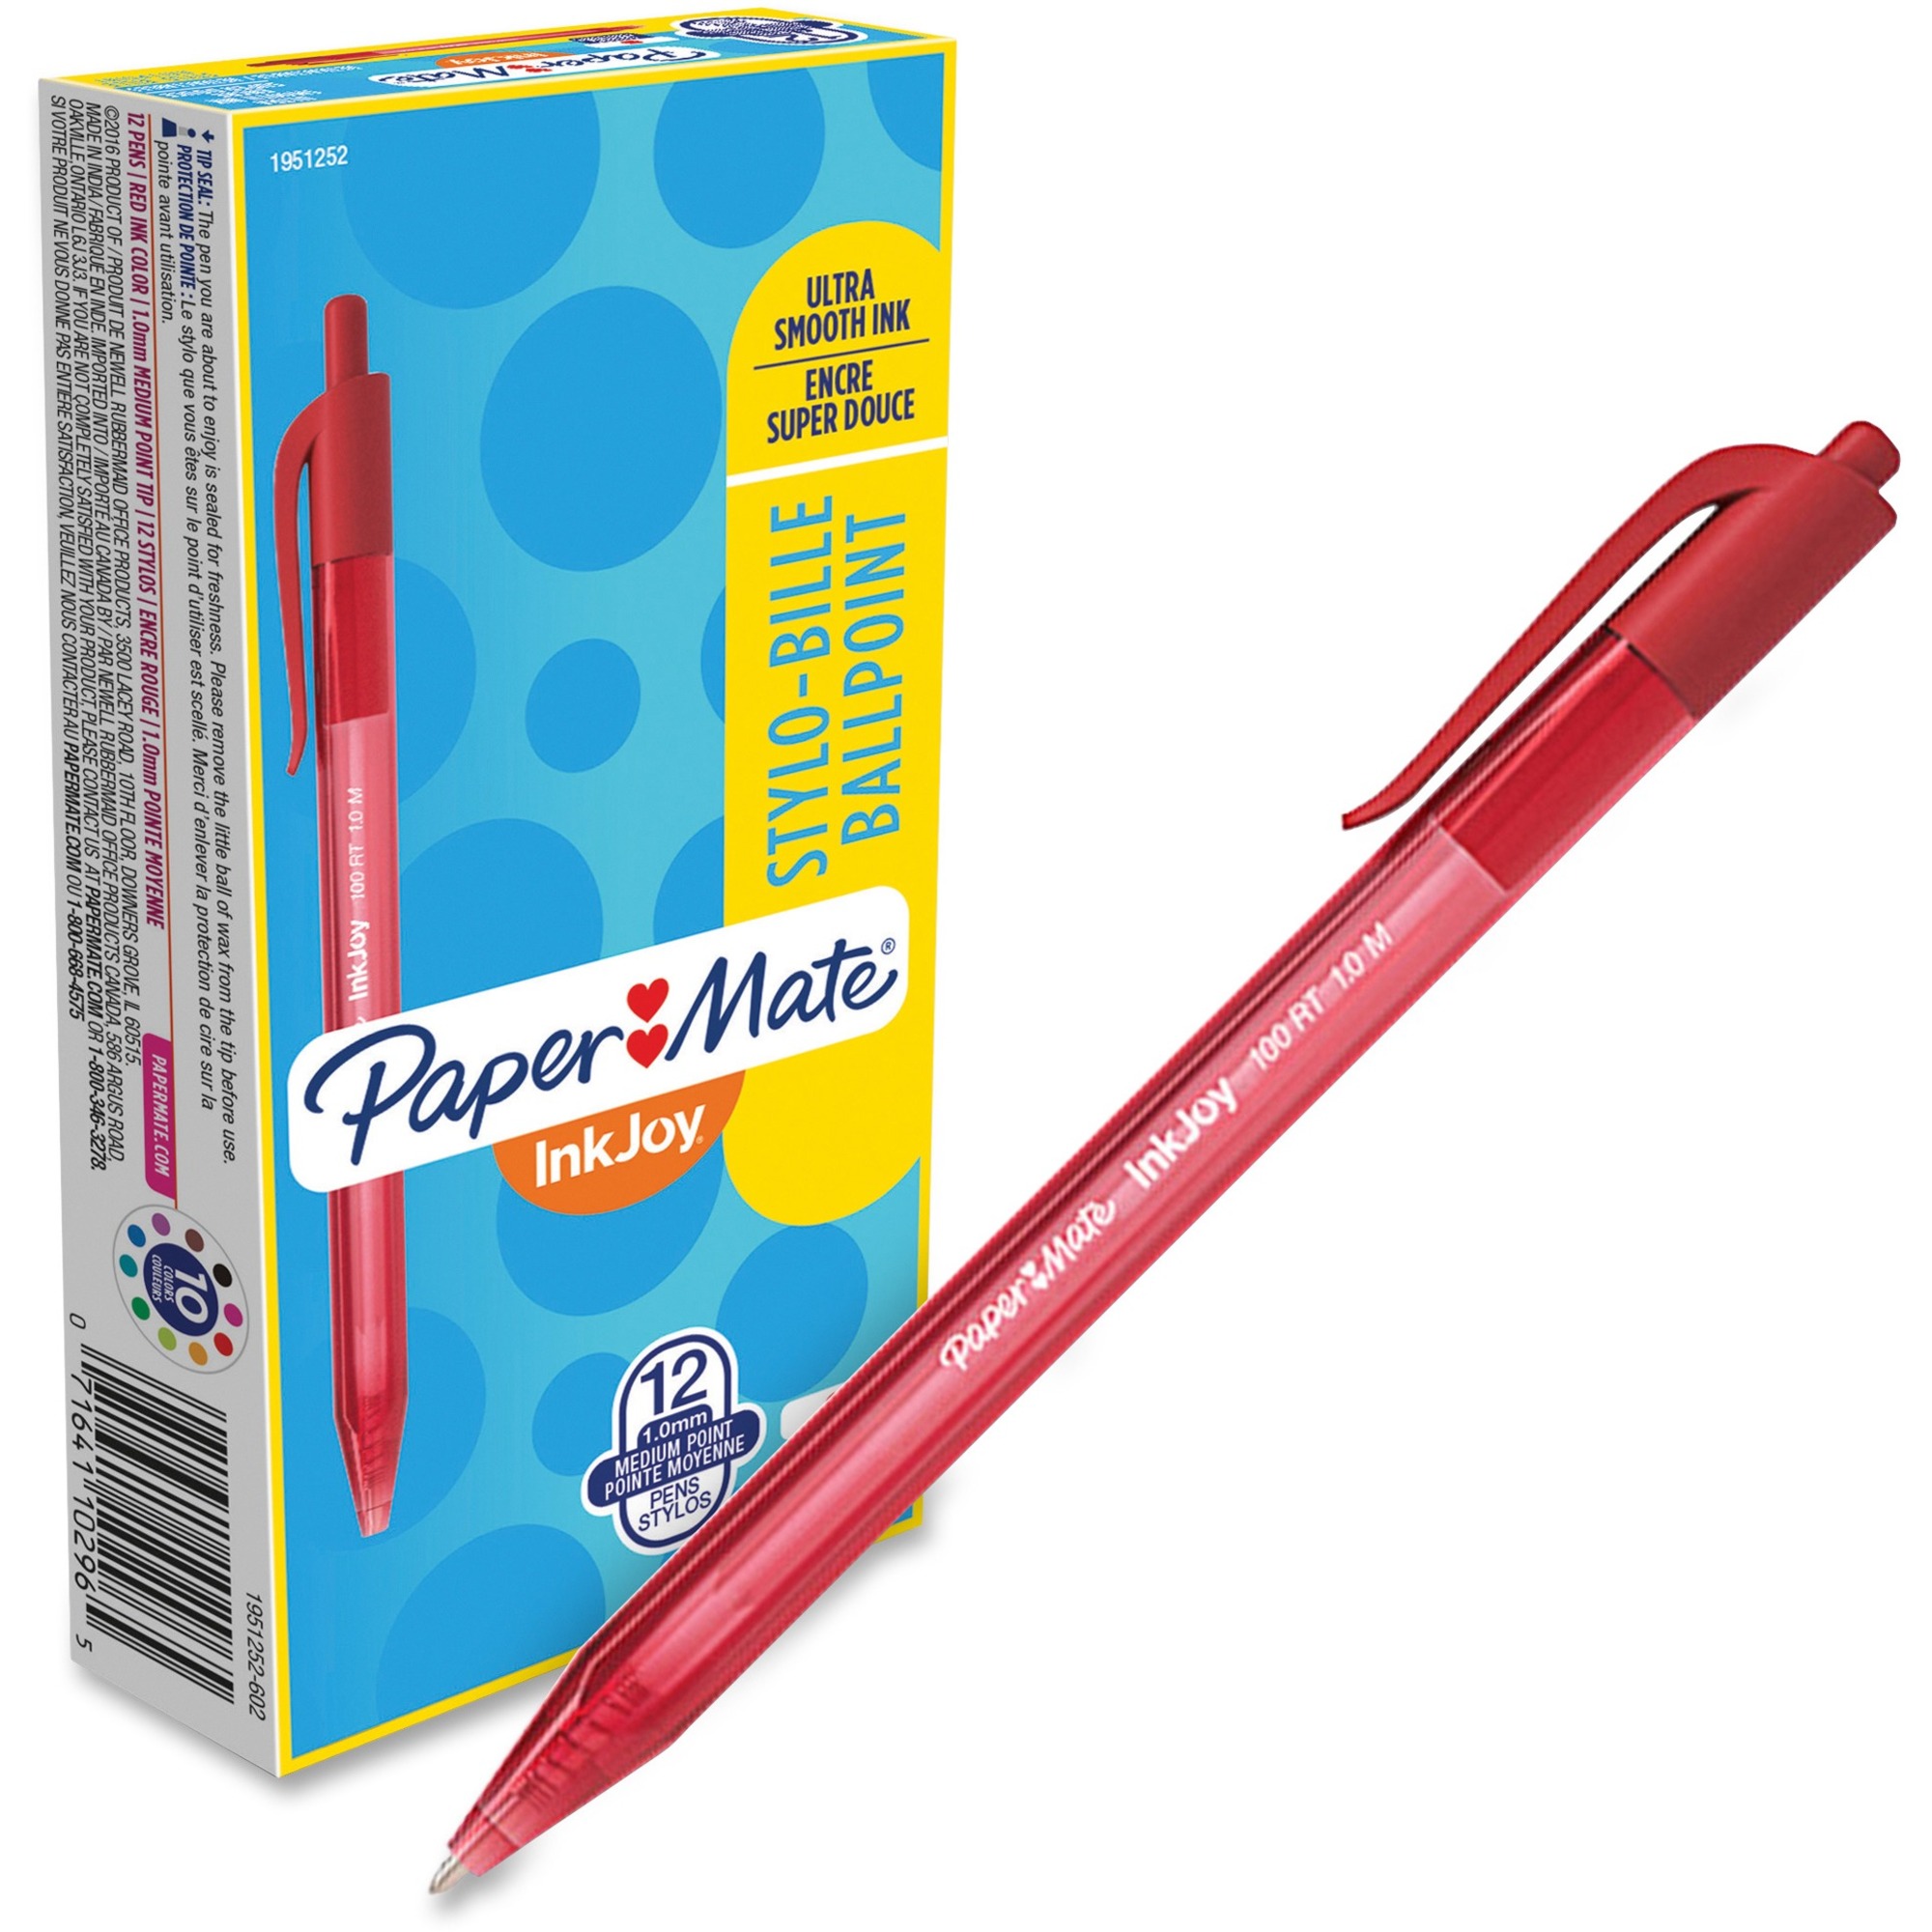 Paper Mate Inkjoy 100 Red Ballpoint Stick Pens - 12/pack